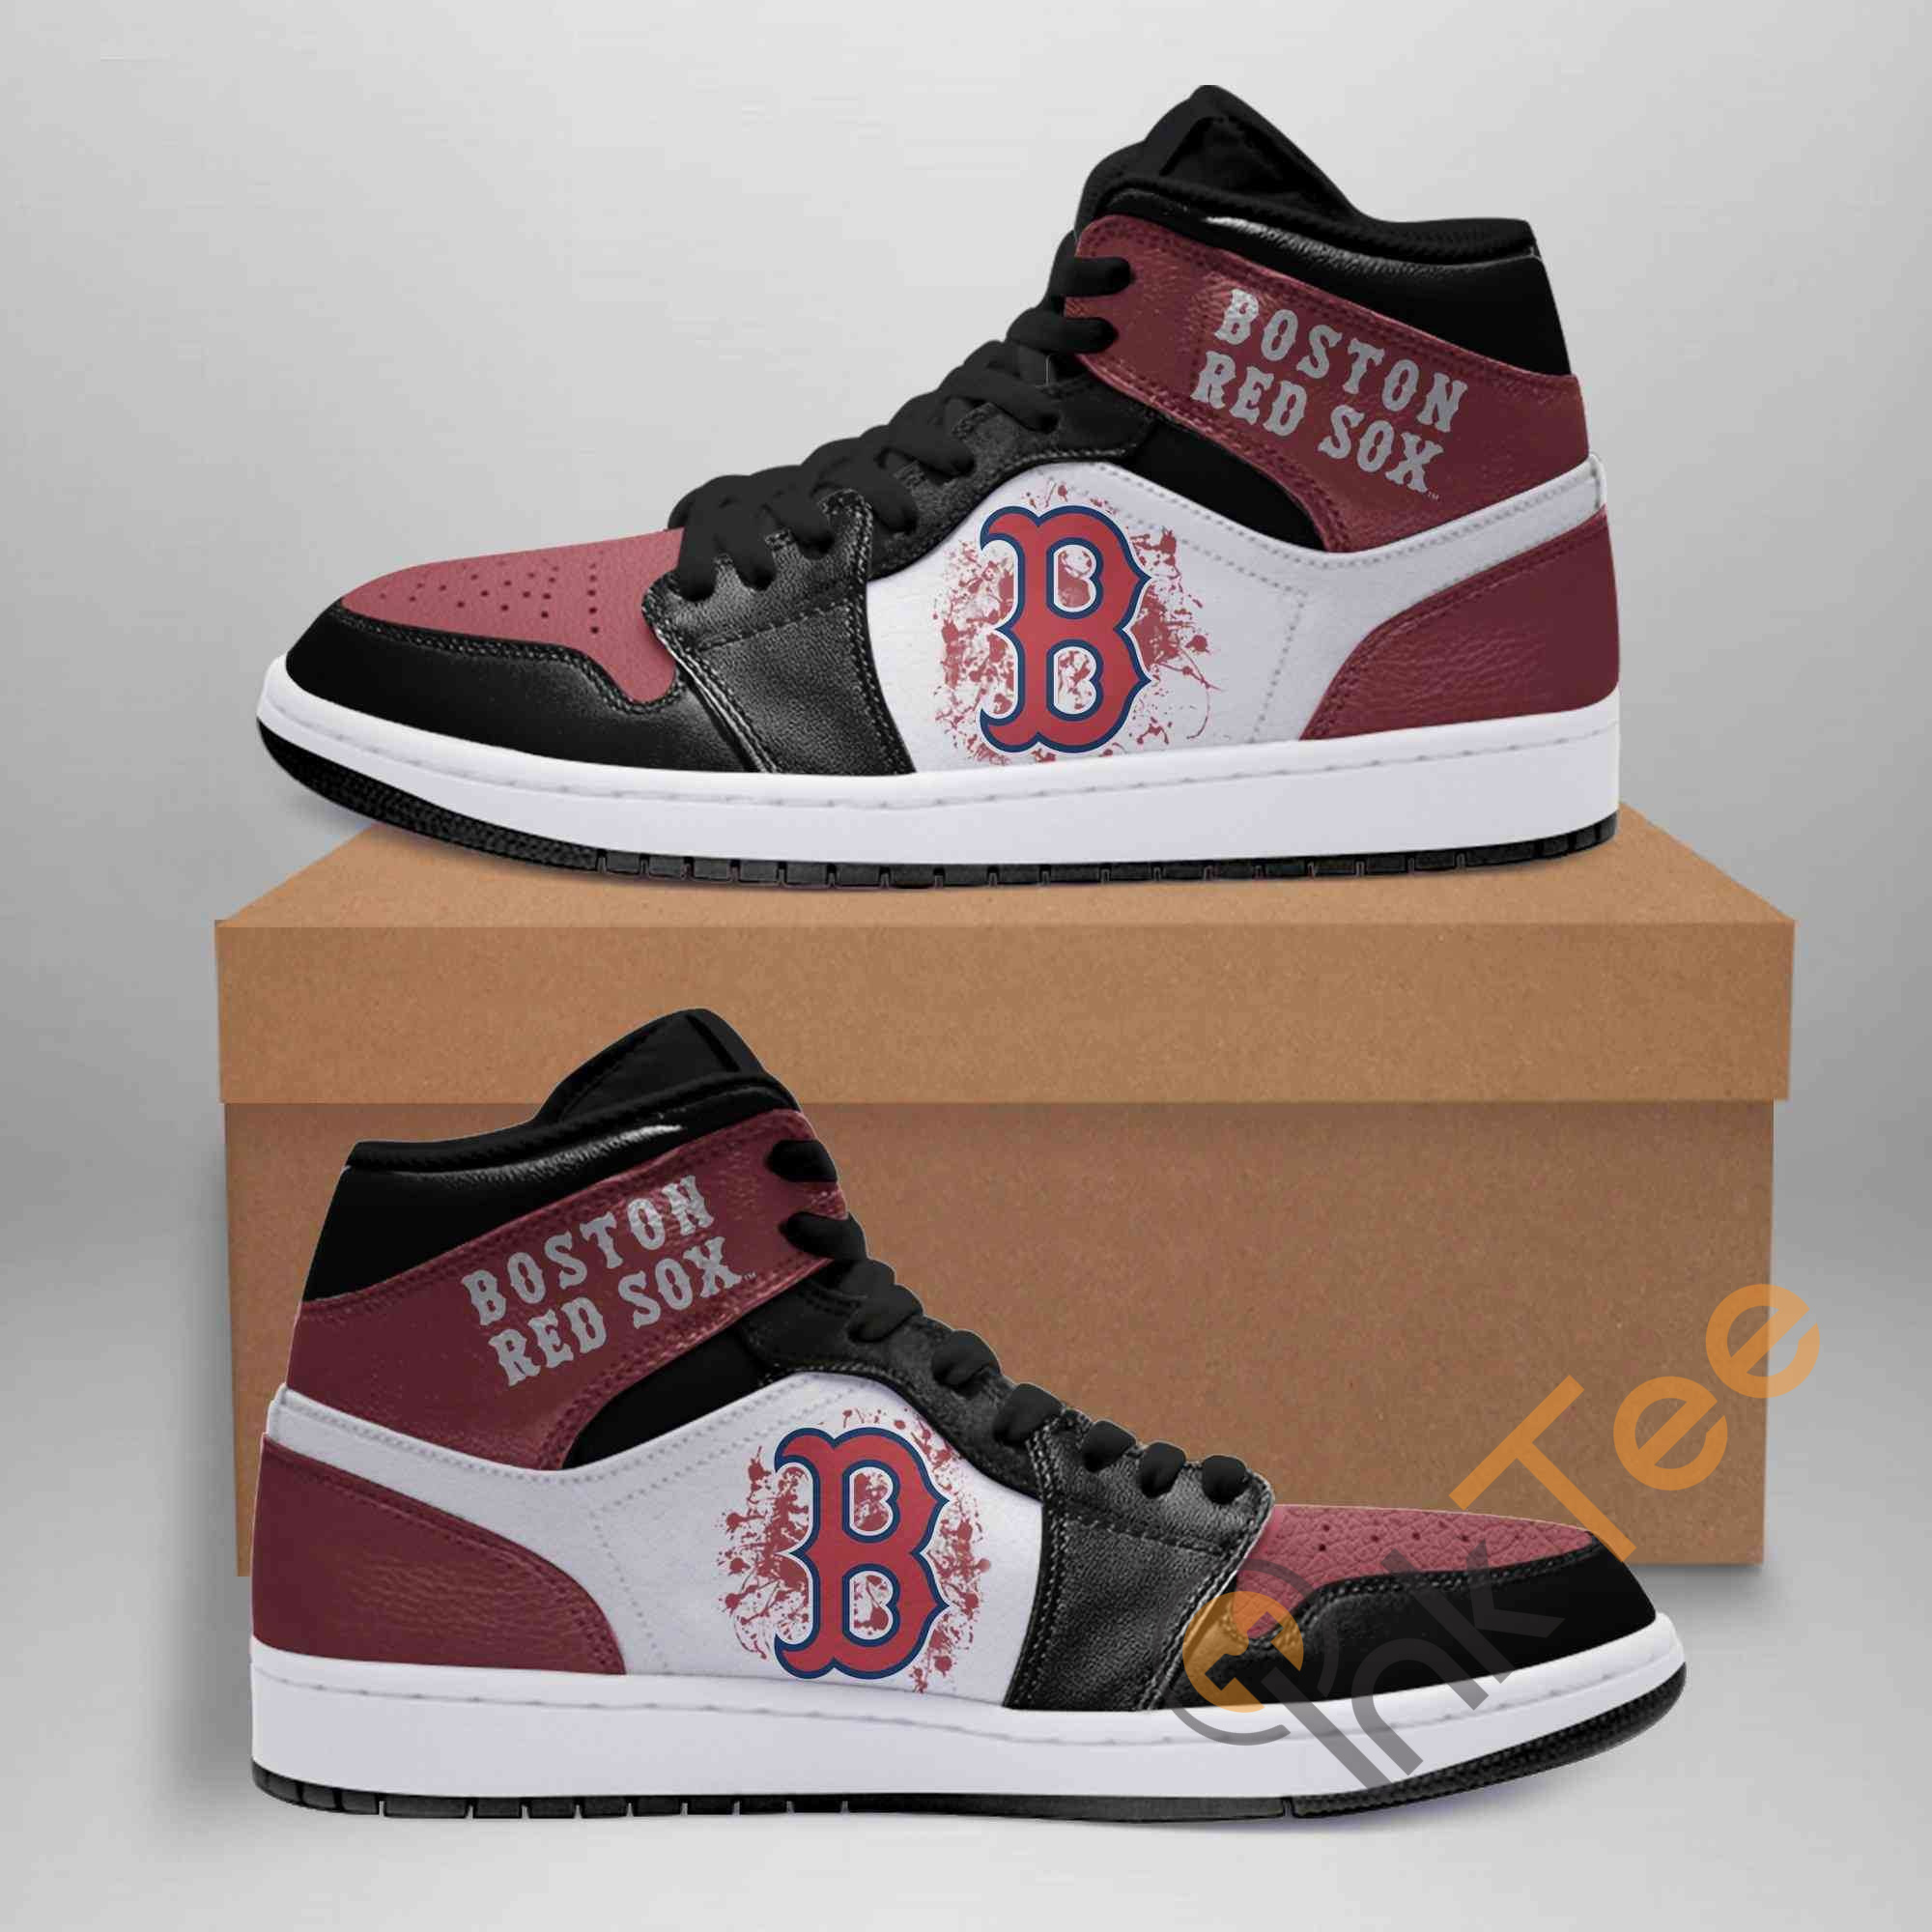 red sox sneakers